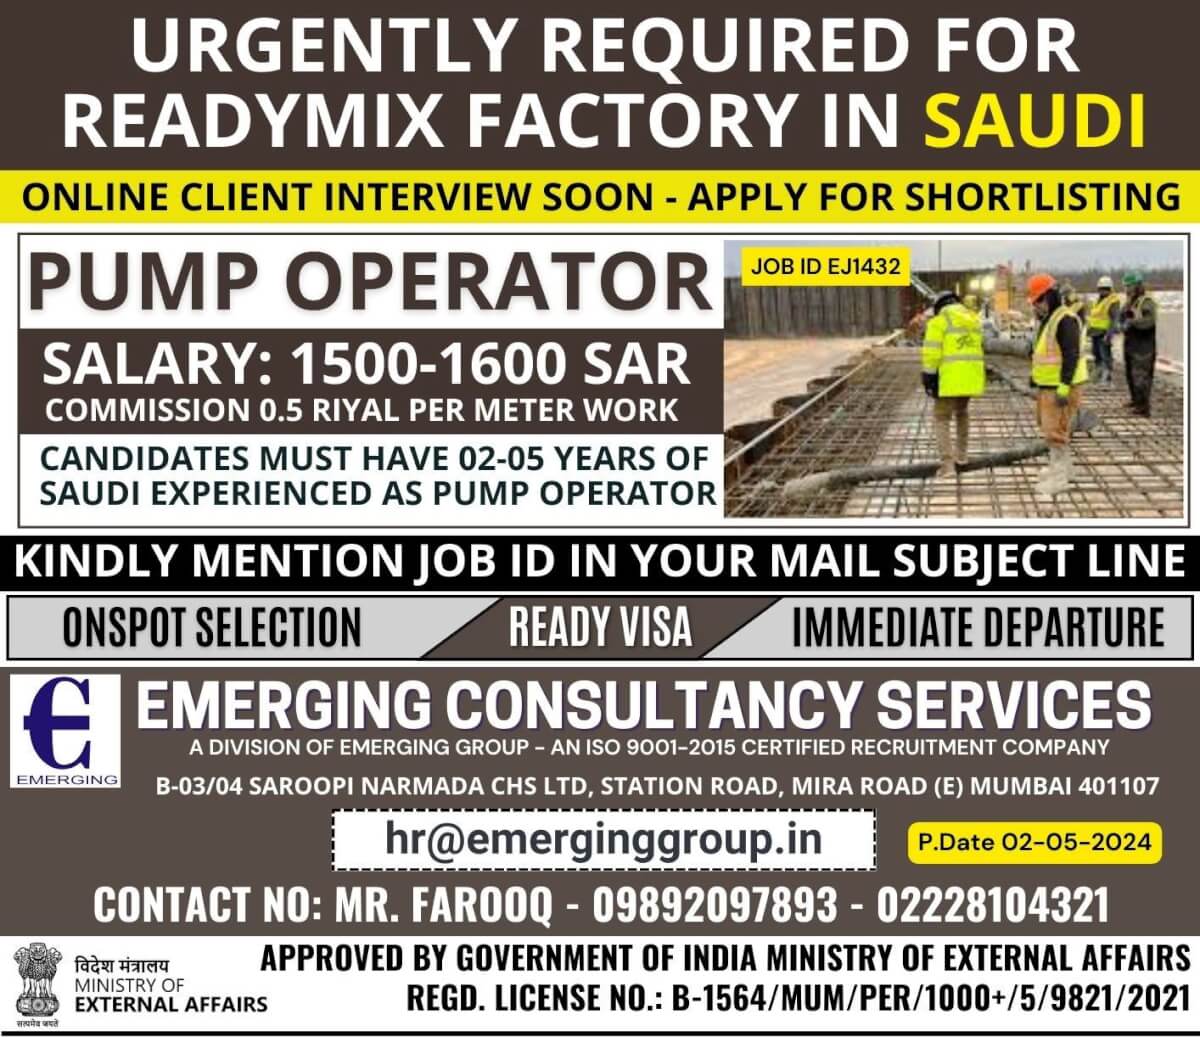 URGENTLY REQUIRED FOR READYMIX FACTORY IN SAUDI ARABIA